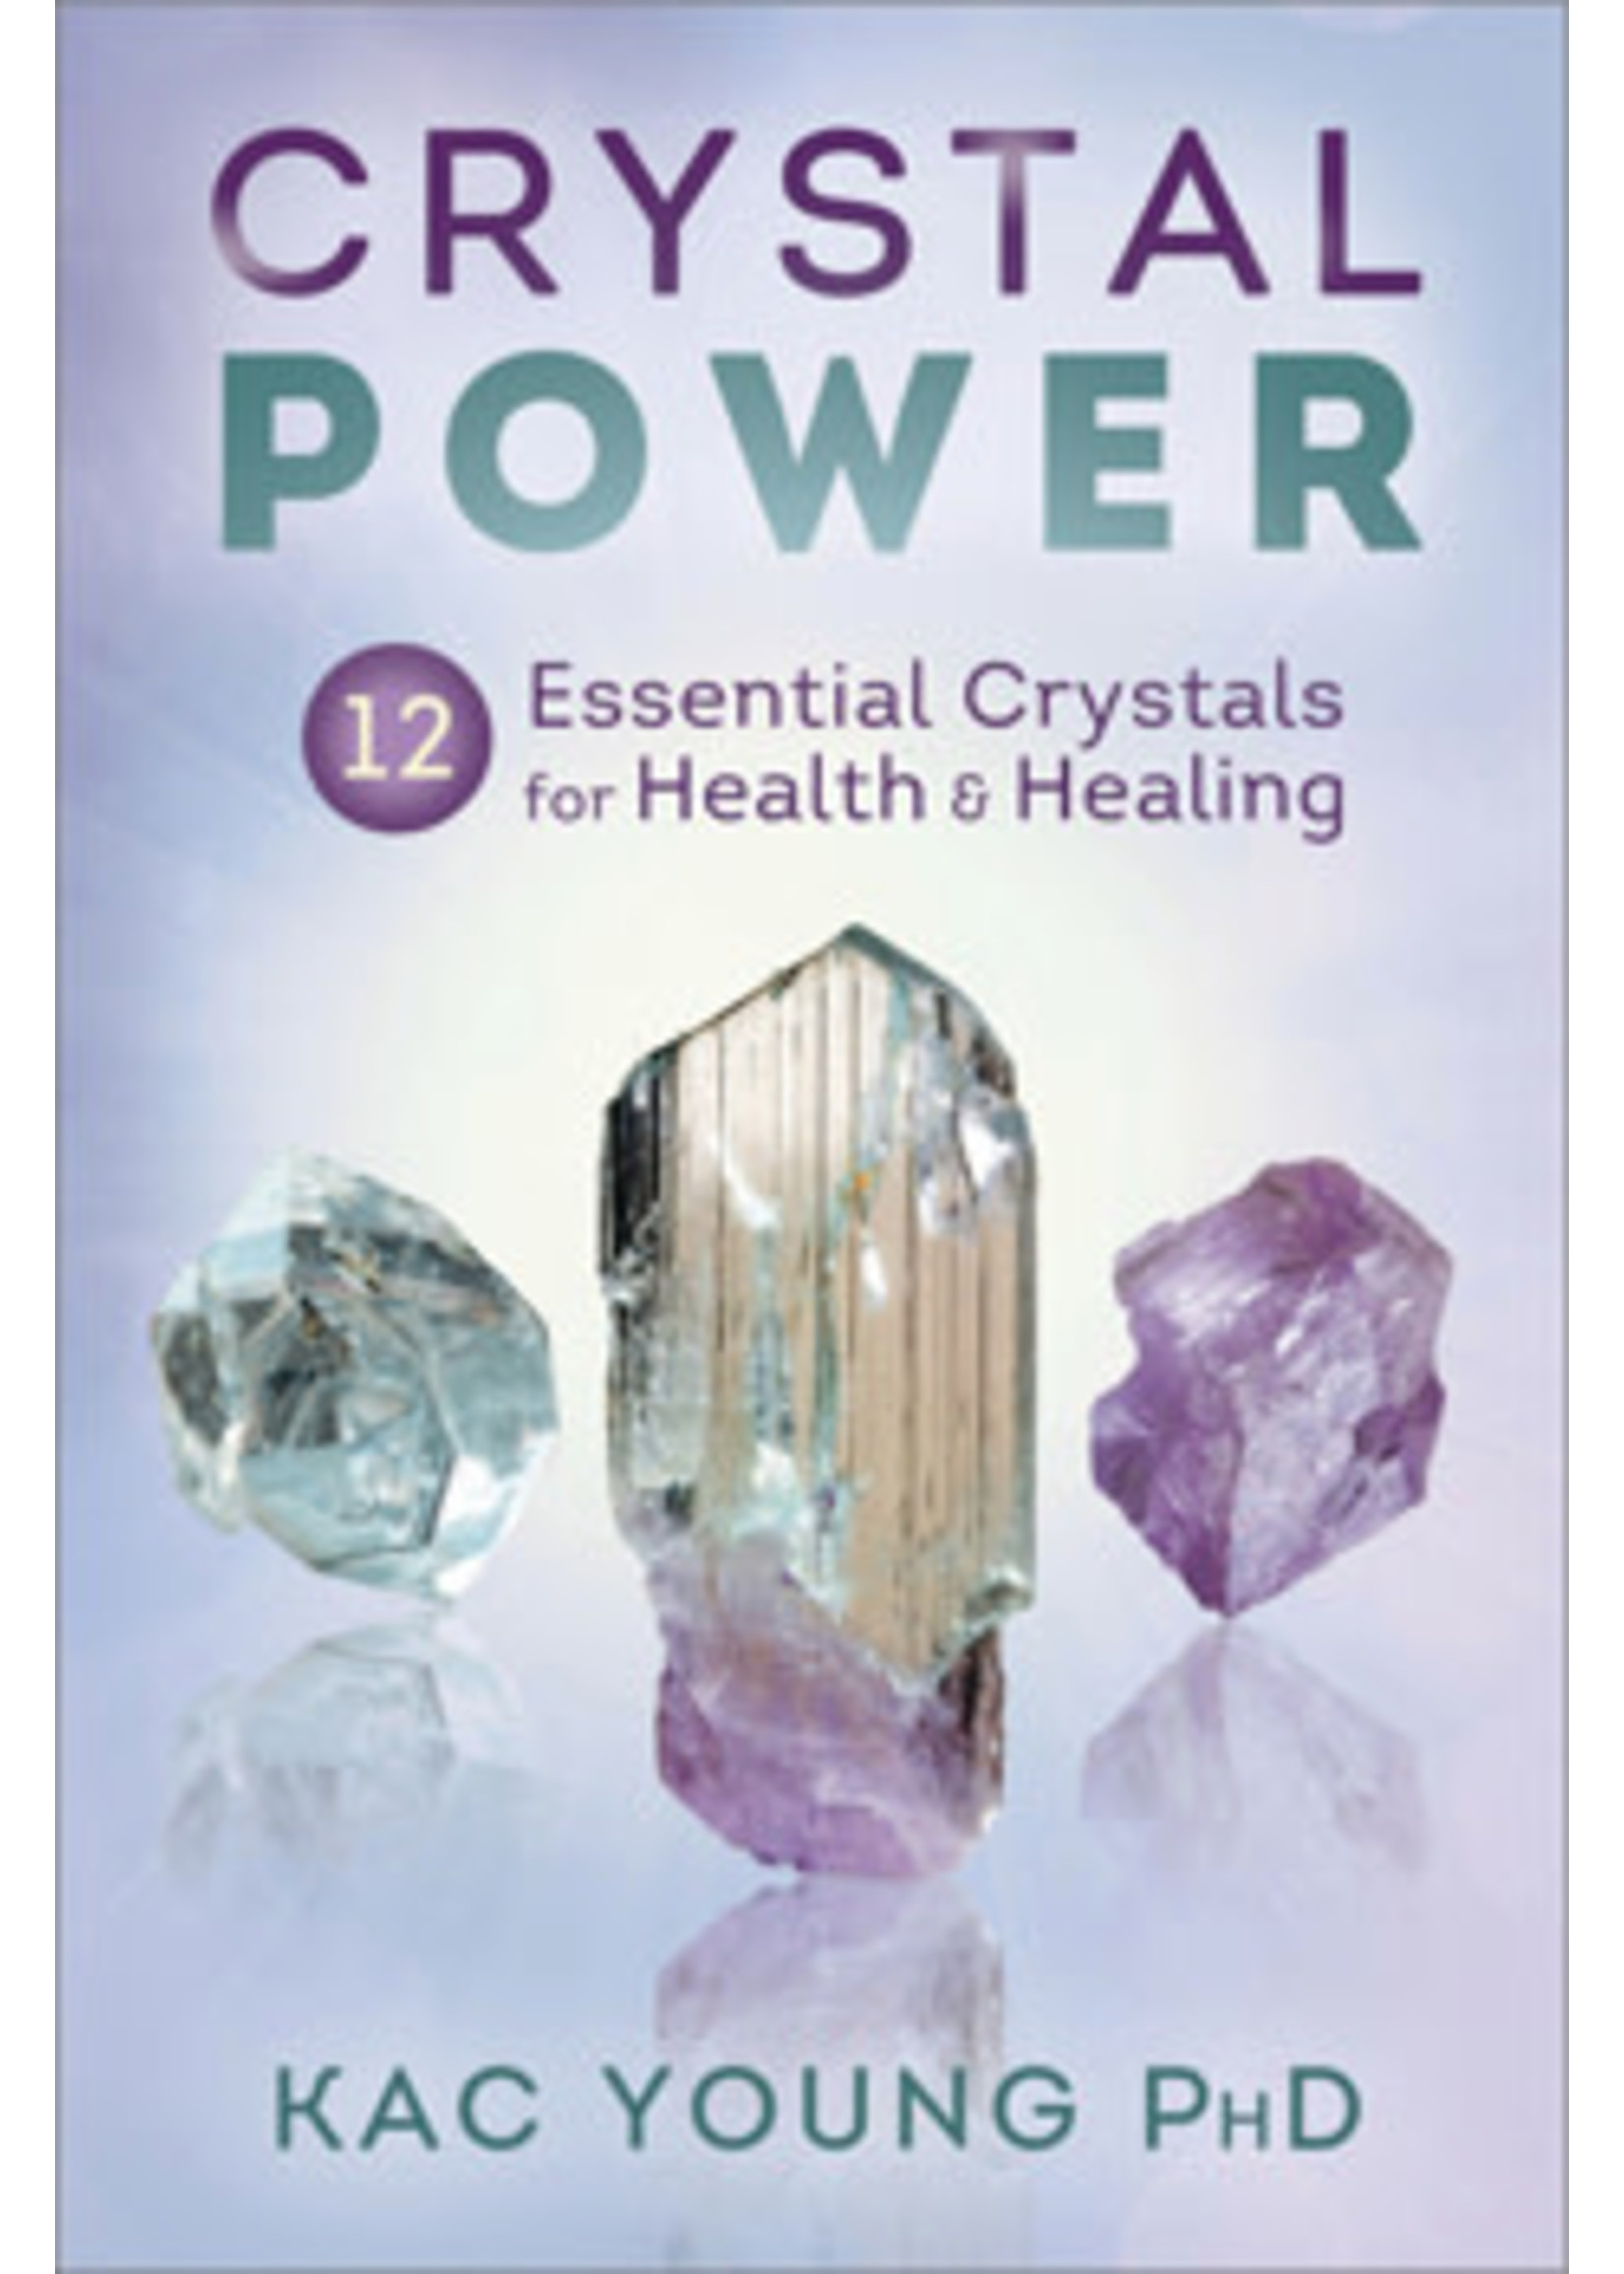 Crystal Power-12 Essential Crystals for Health & Healing